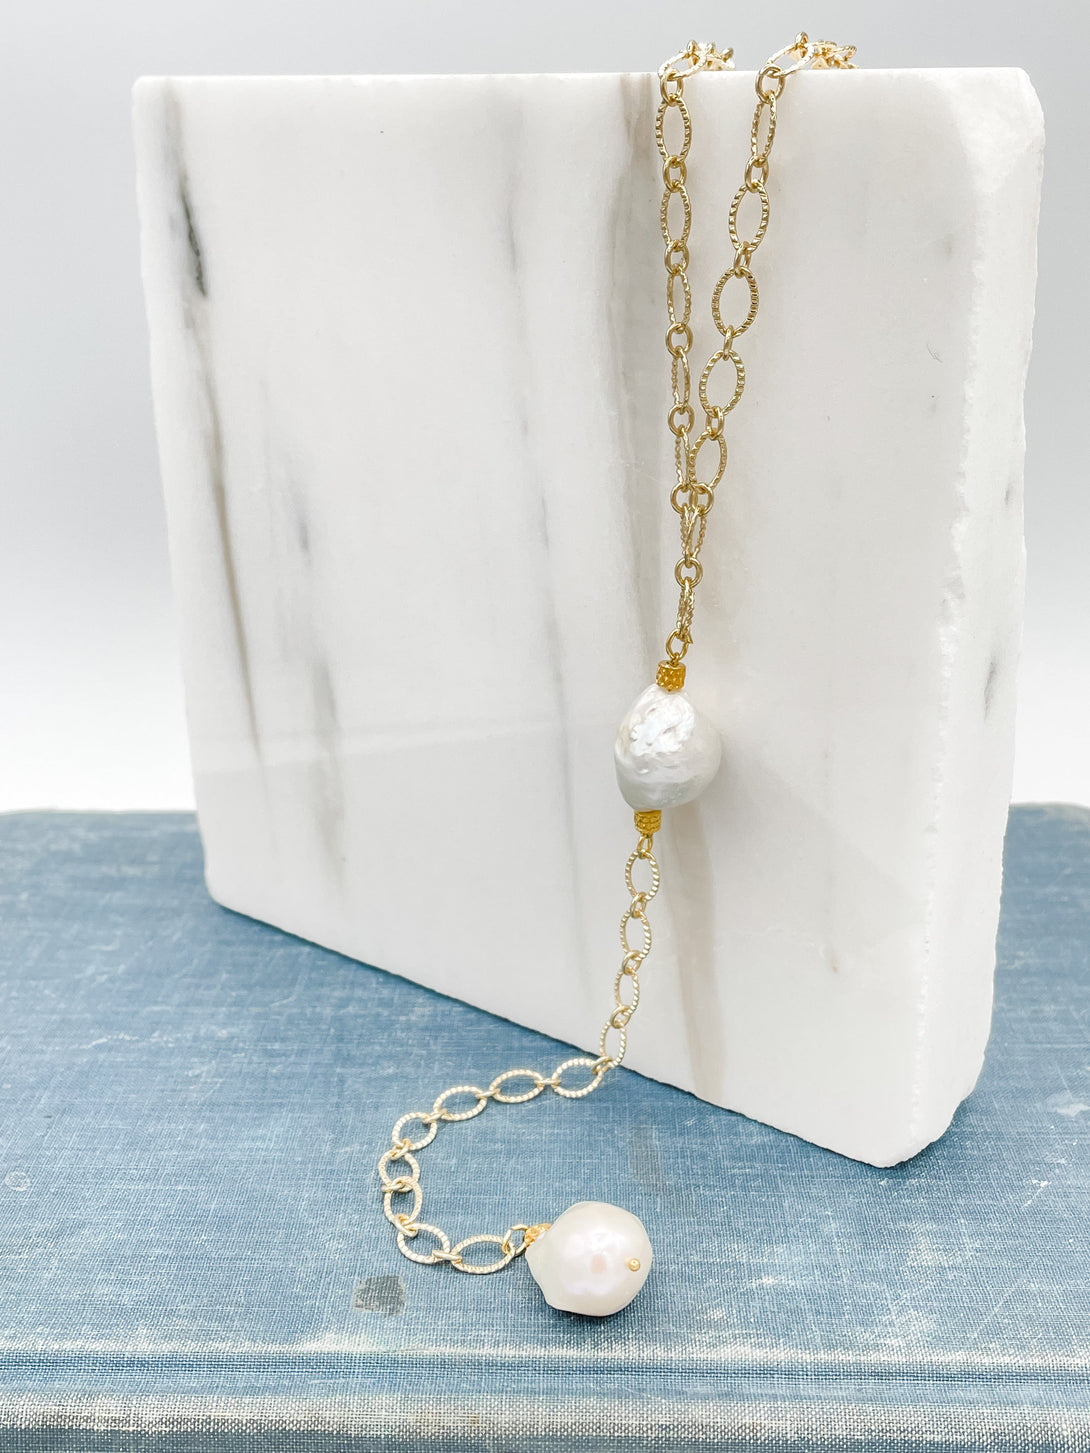 Gold Chain Necklace with Medium Baroque Pearls and Drop Feature